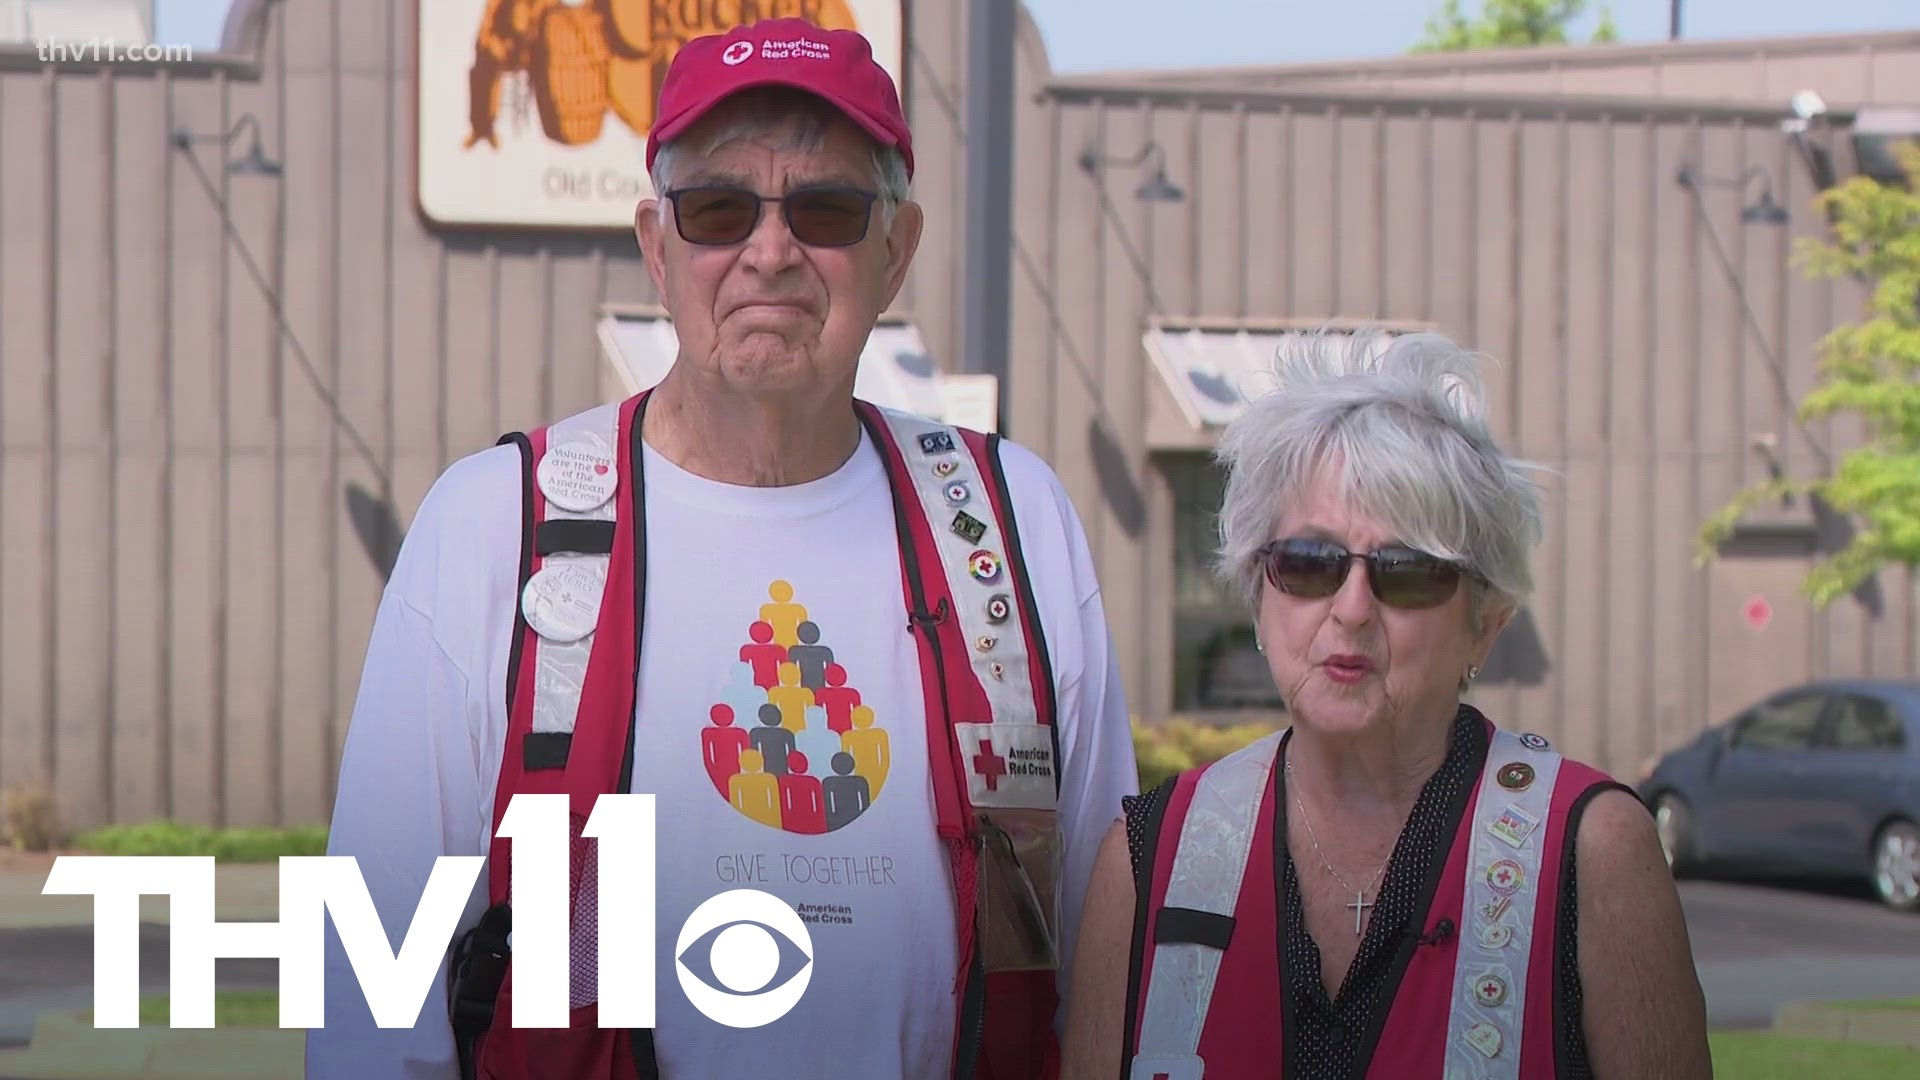 We're introducing you to one out-of-state couple that has been spending their retirement giving back to victims of the tornadoes in Arkansas.